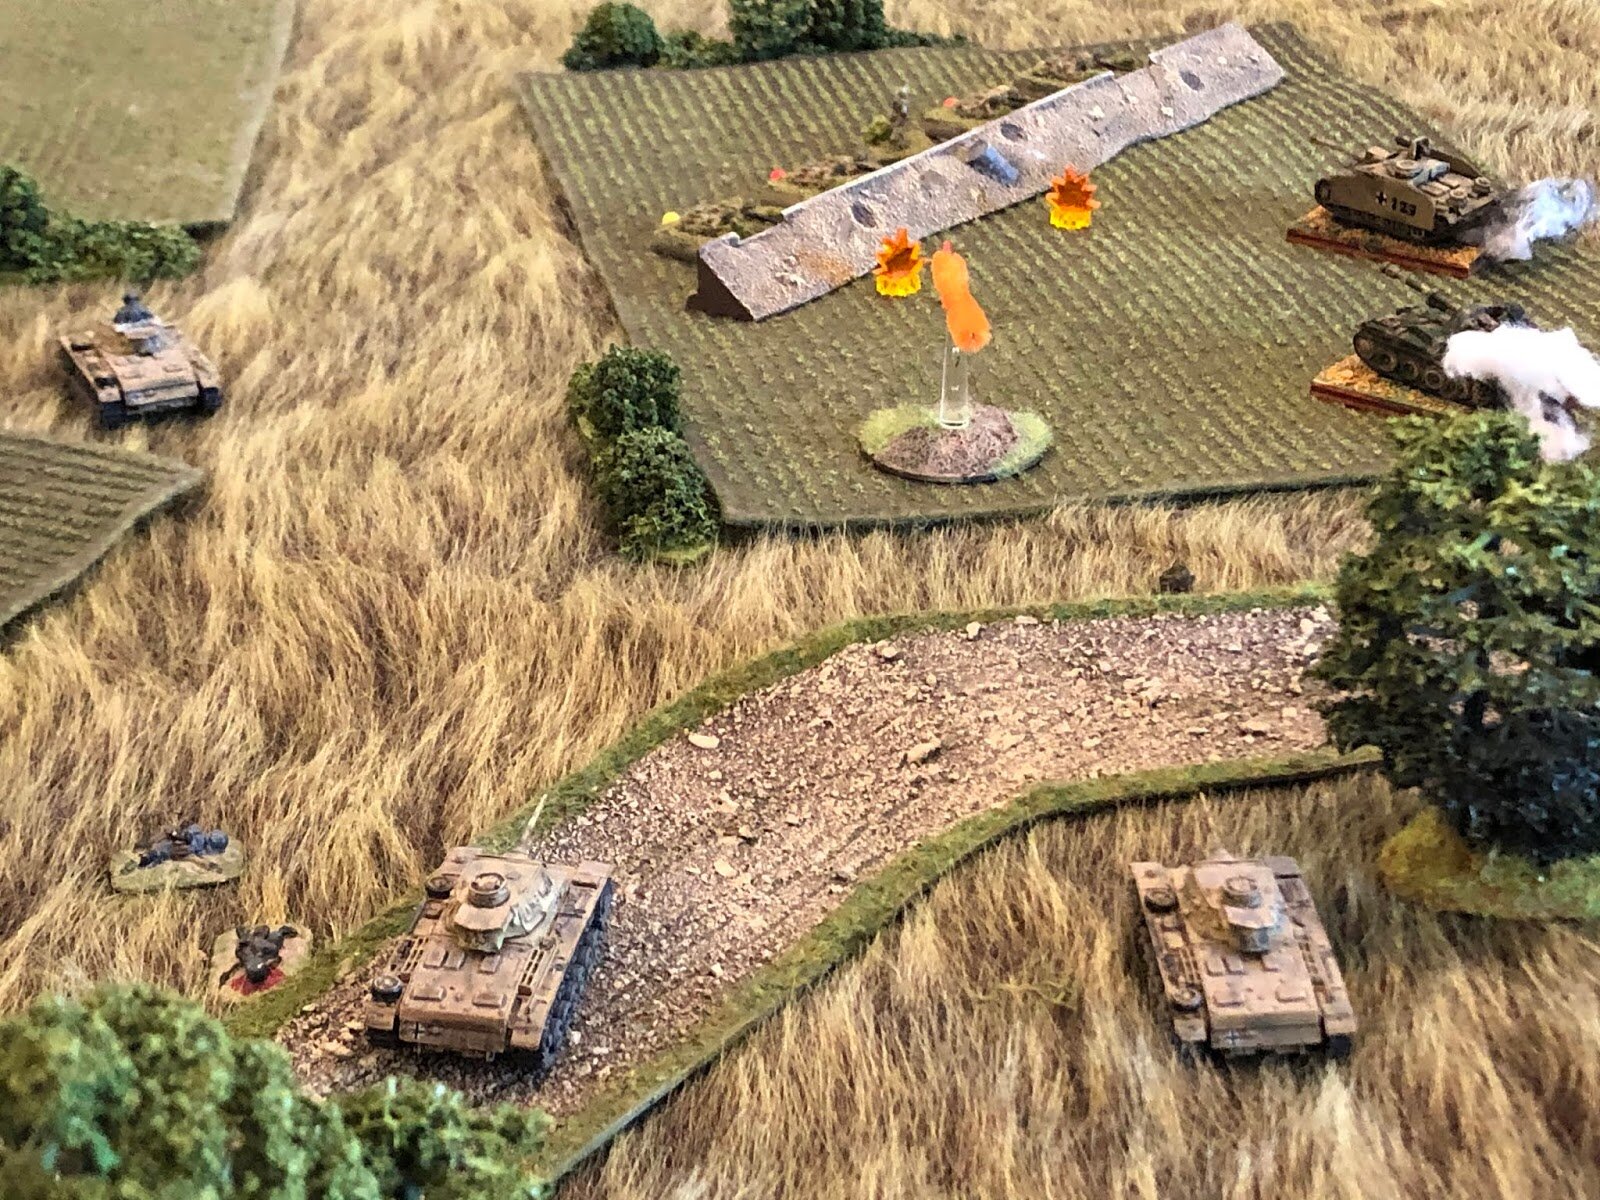 V2 and V3 lay into the Soviet ATR Platoon with their MGs and main guns.